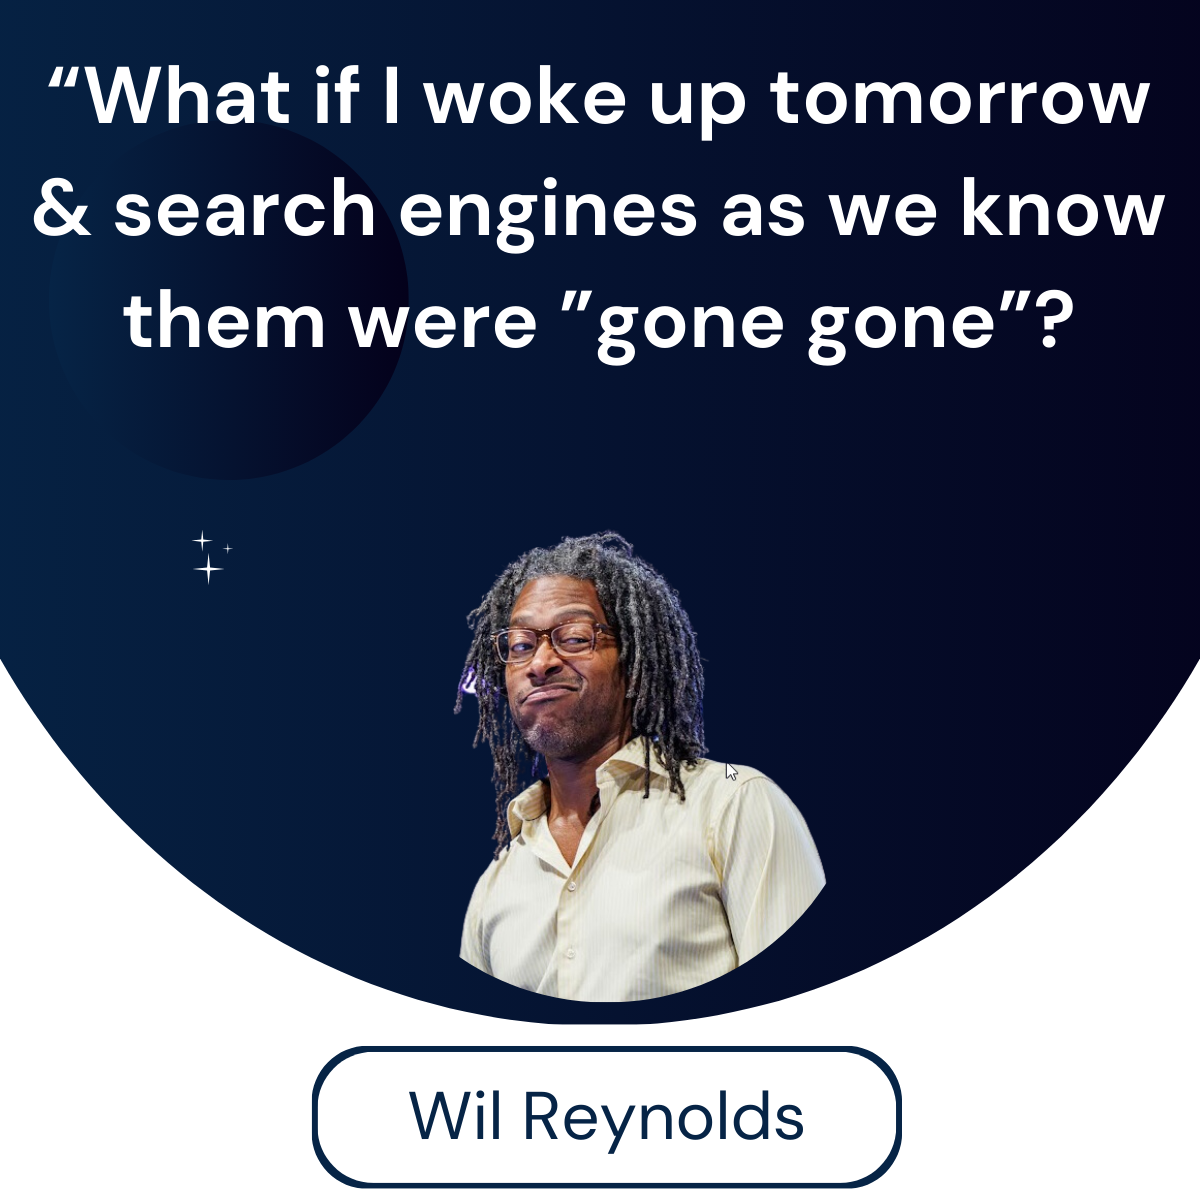 Thought Exercise: What if people stopped using search engines tomorrow?